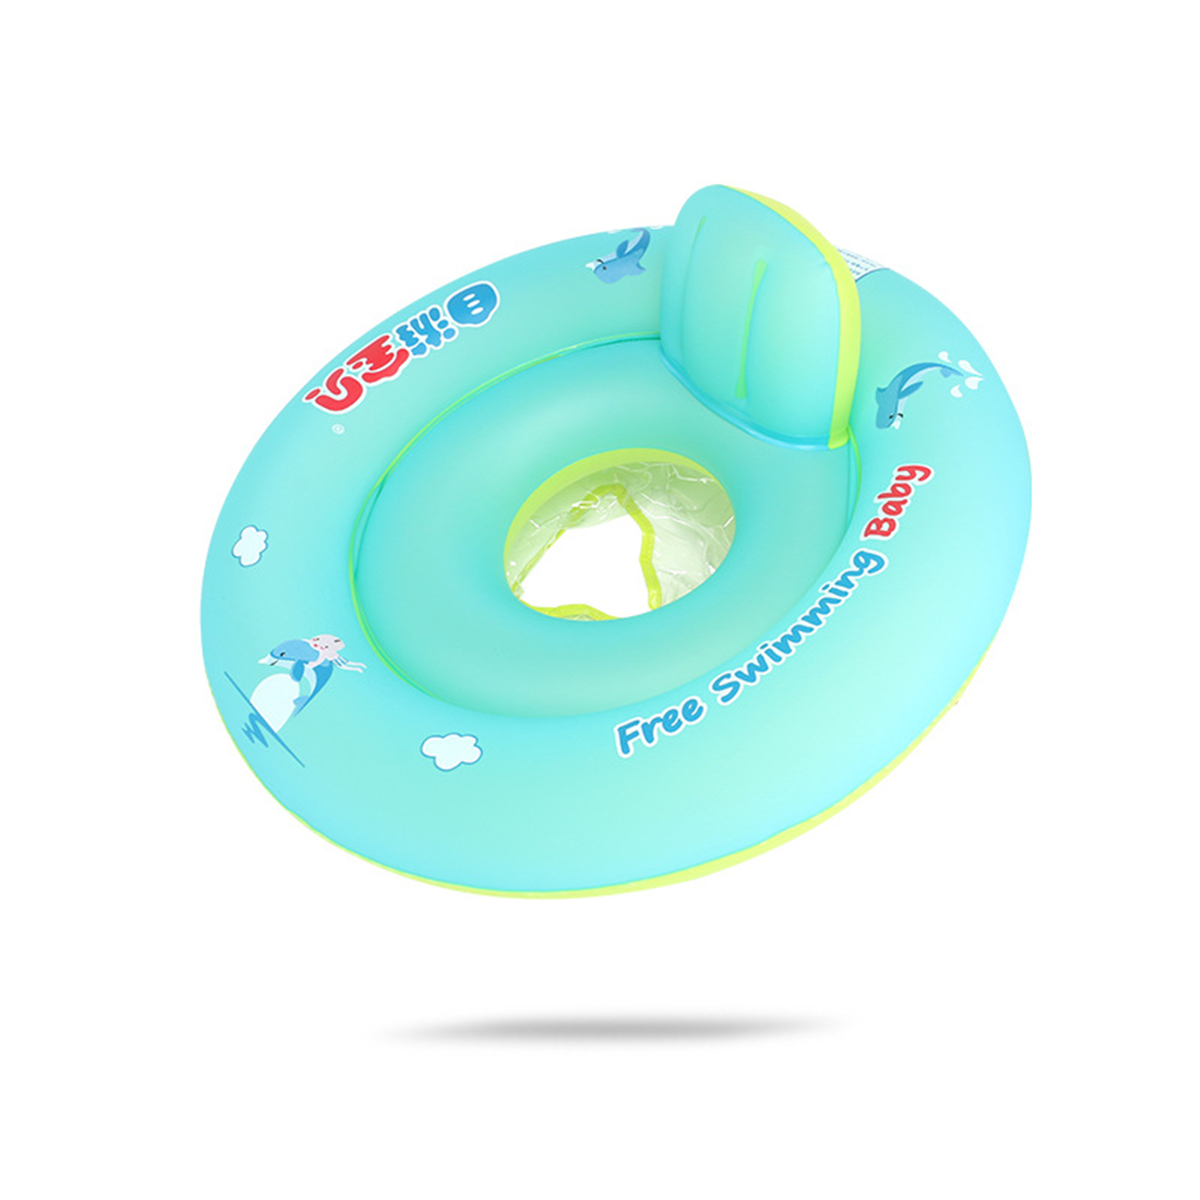 Baby-Float-Swimming-Ring-Kid-Inflatable-Beach-Tube-Pool-Water-Fun-Toy-SML-1293907